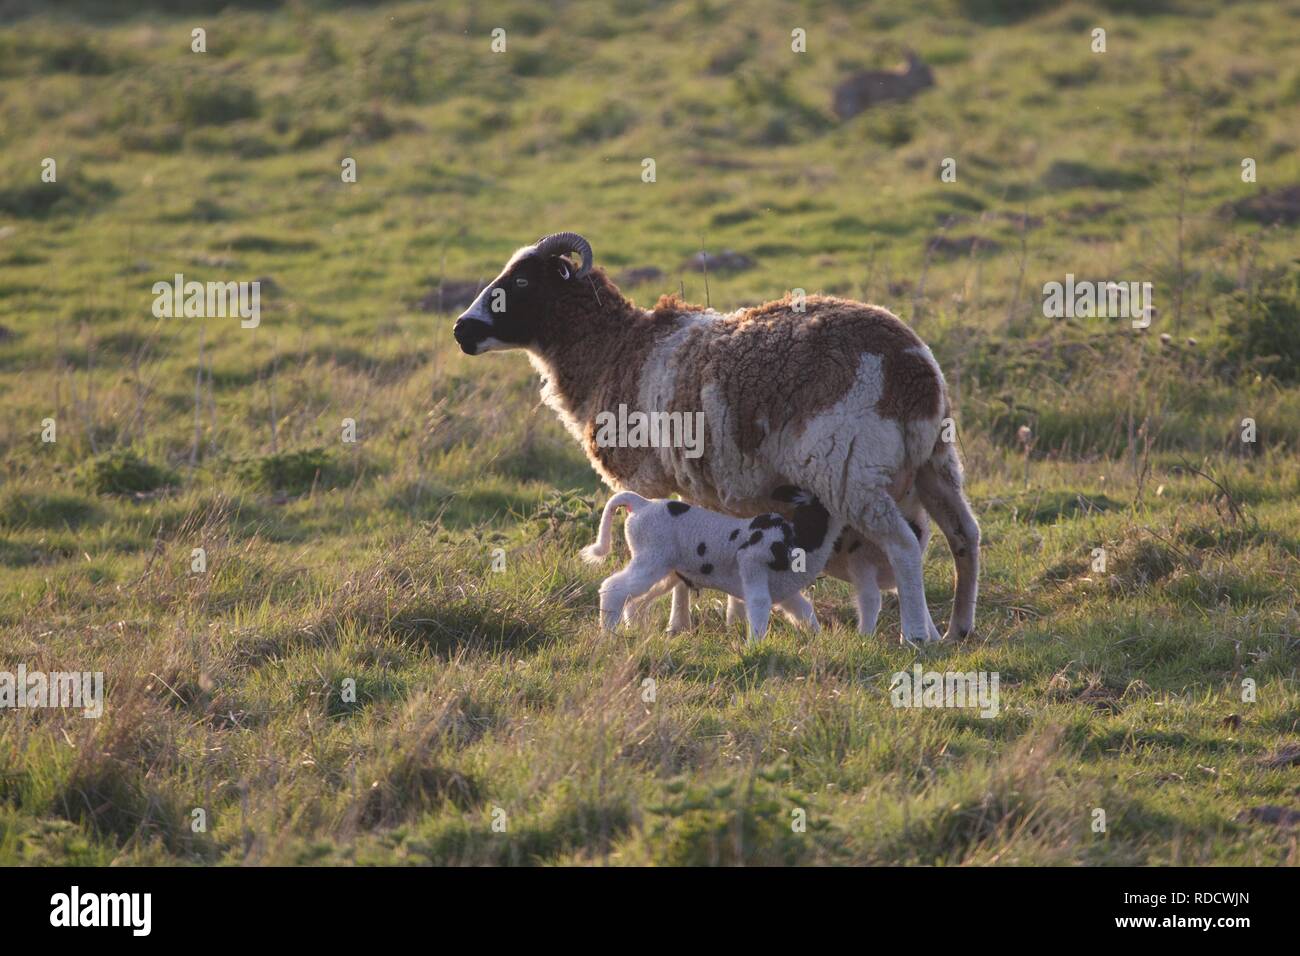 Two lambs suckling on a grassy field Stock Photo